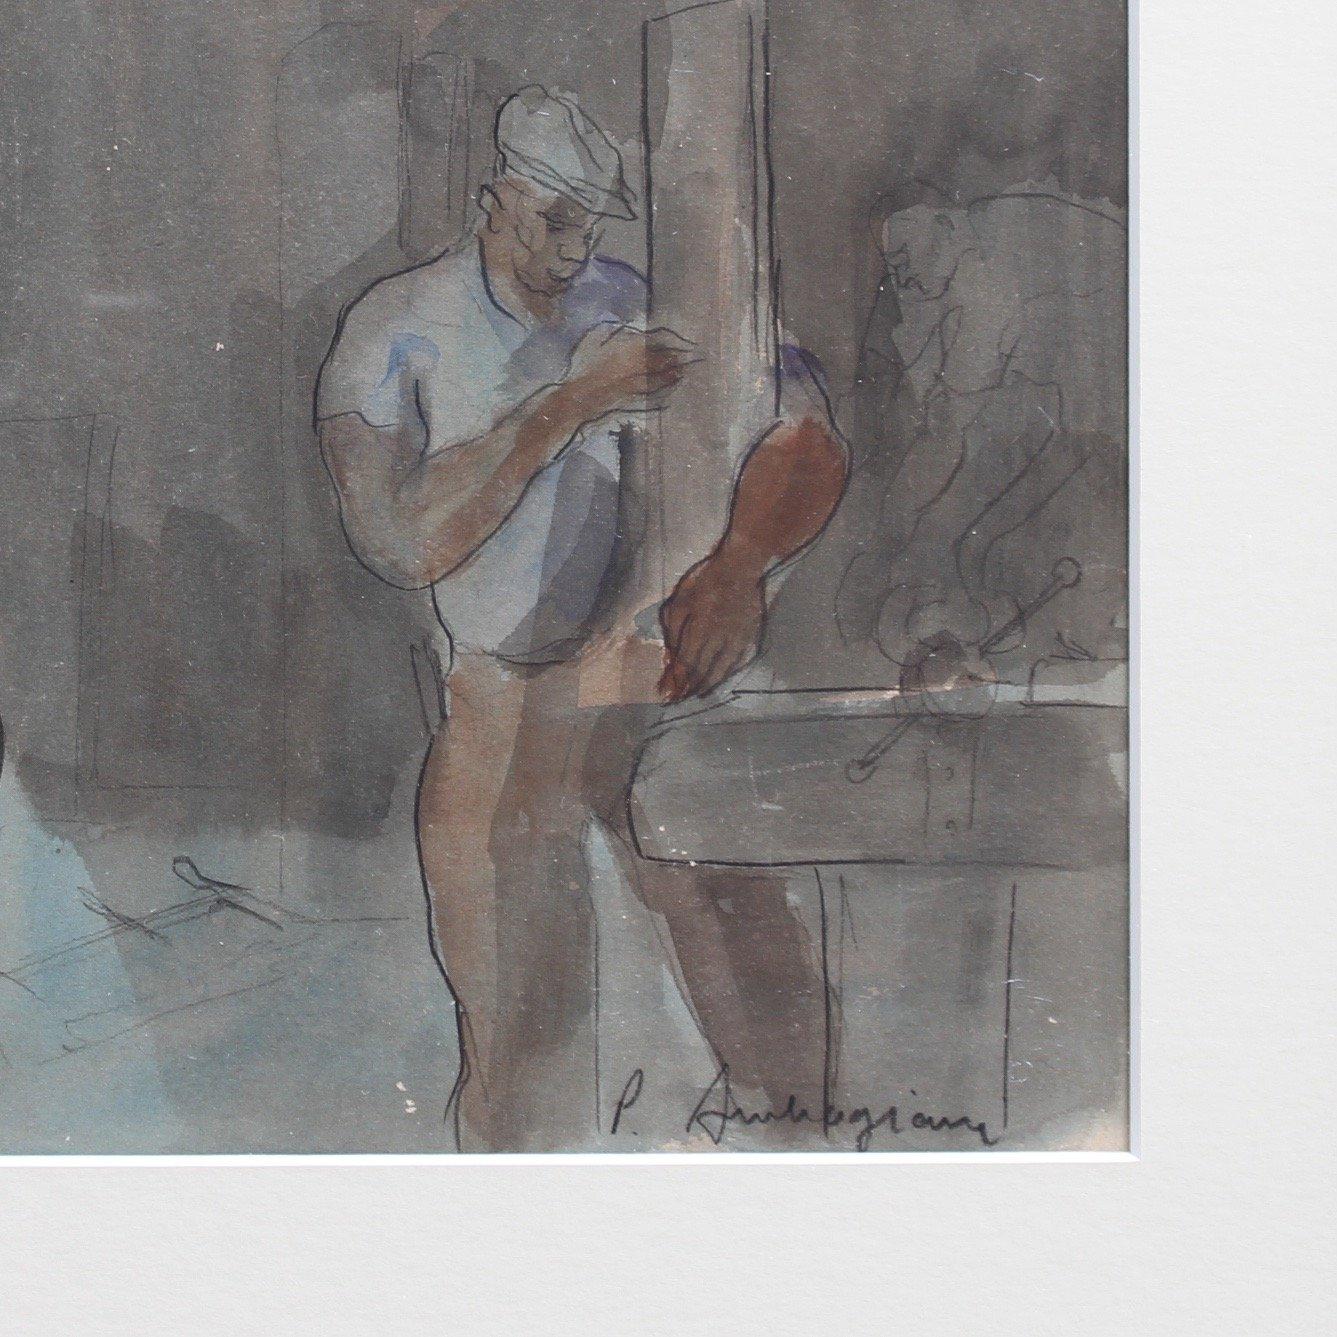 'Carpenter and Nursing Mother', pencil, ink and gouache on paper (c. 1960s). A mother breast feeding her infant looks on peacefully at the father of the child as he works the tools of the trade in a joiner's workshop. The mother and baby bathed in